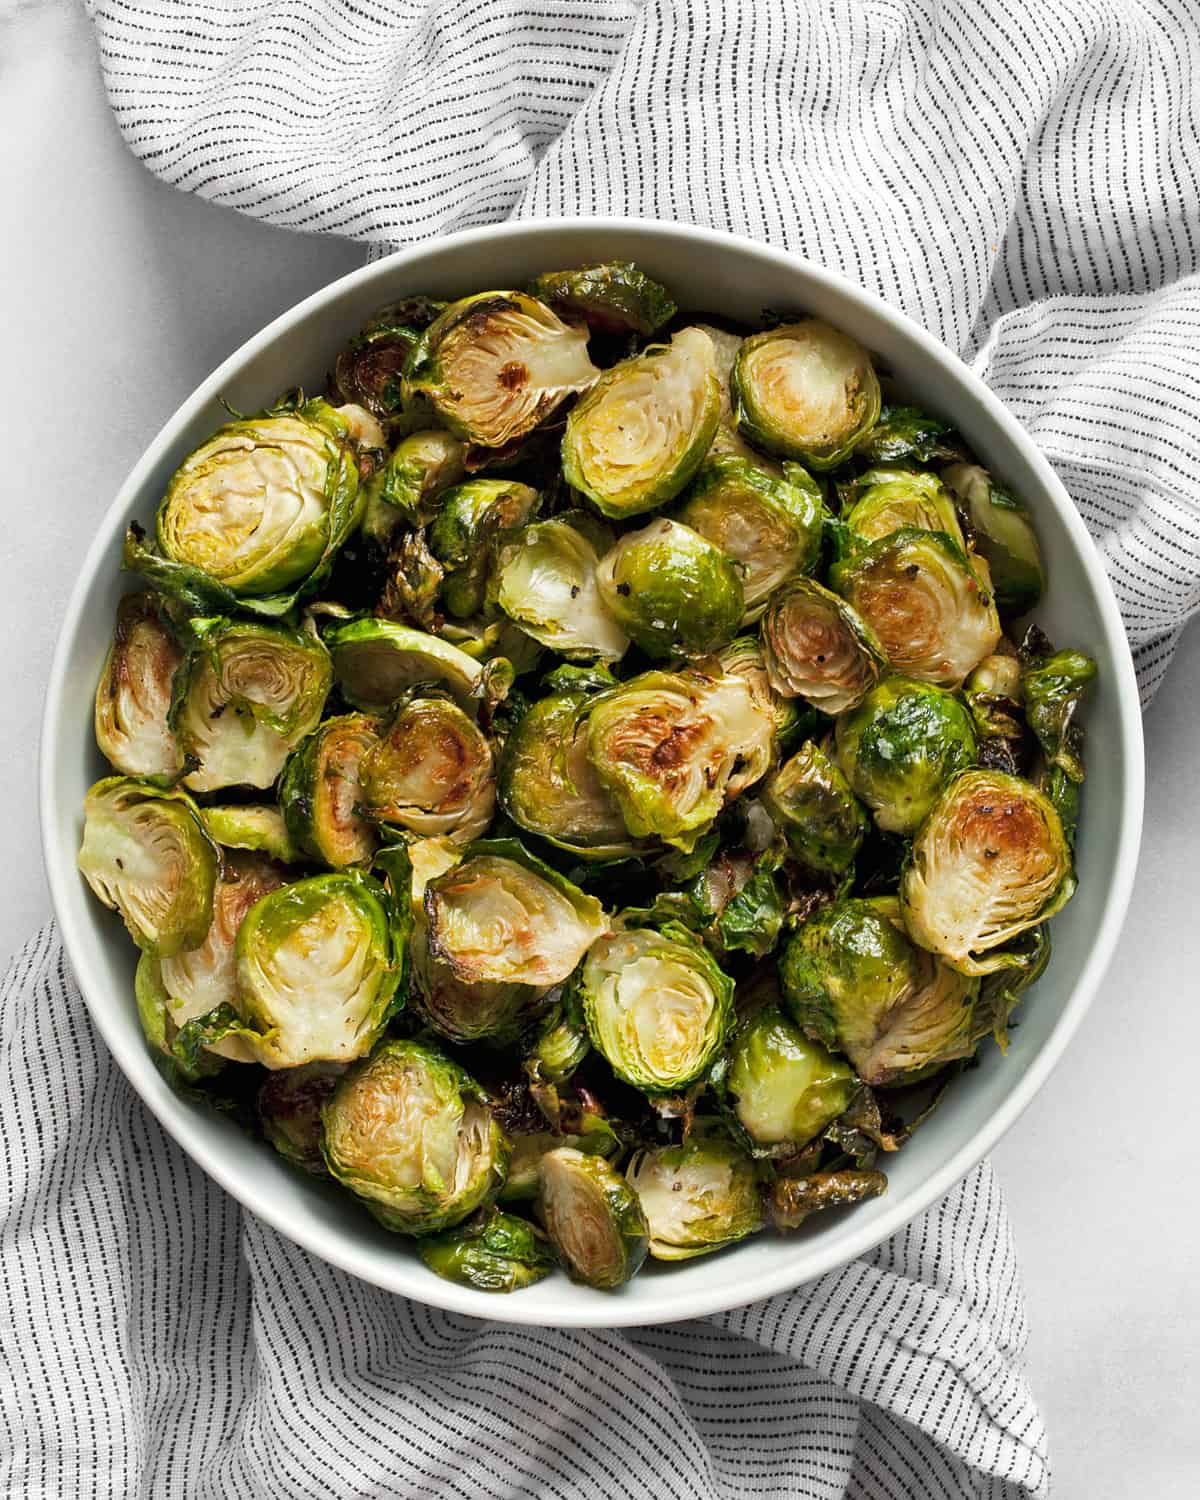 Thinly sliced crispy roasted brussels sprouts in a bowl.